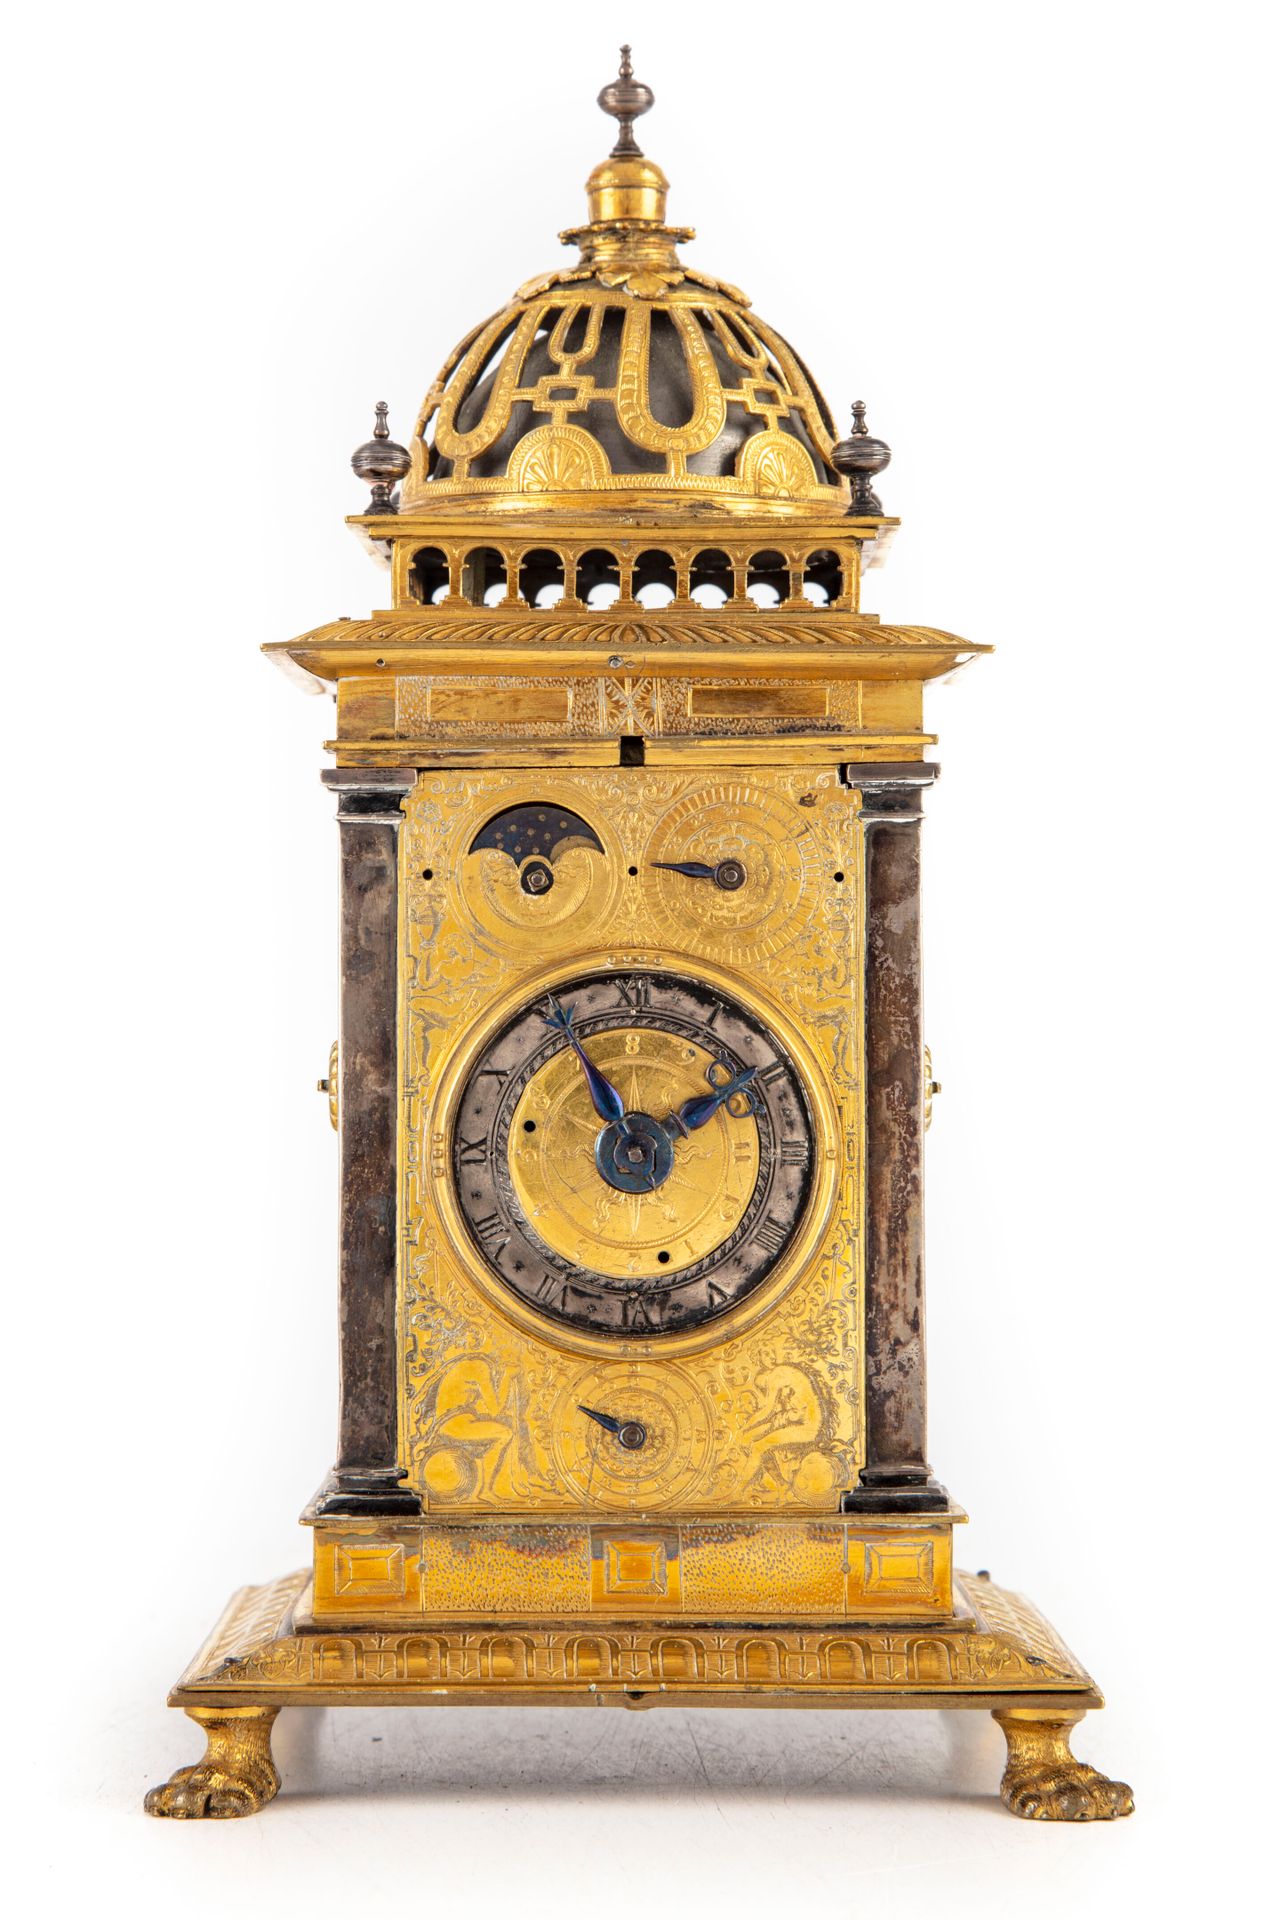 Null Table clock called "Turmchenuhr" in the form of a tower surmounted by a dom&hellip;